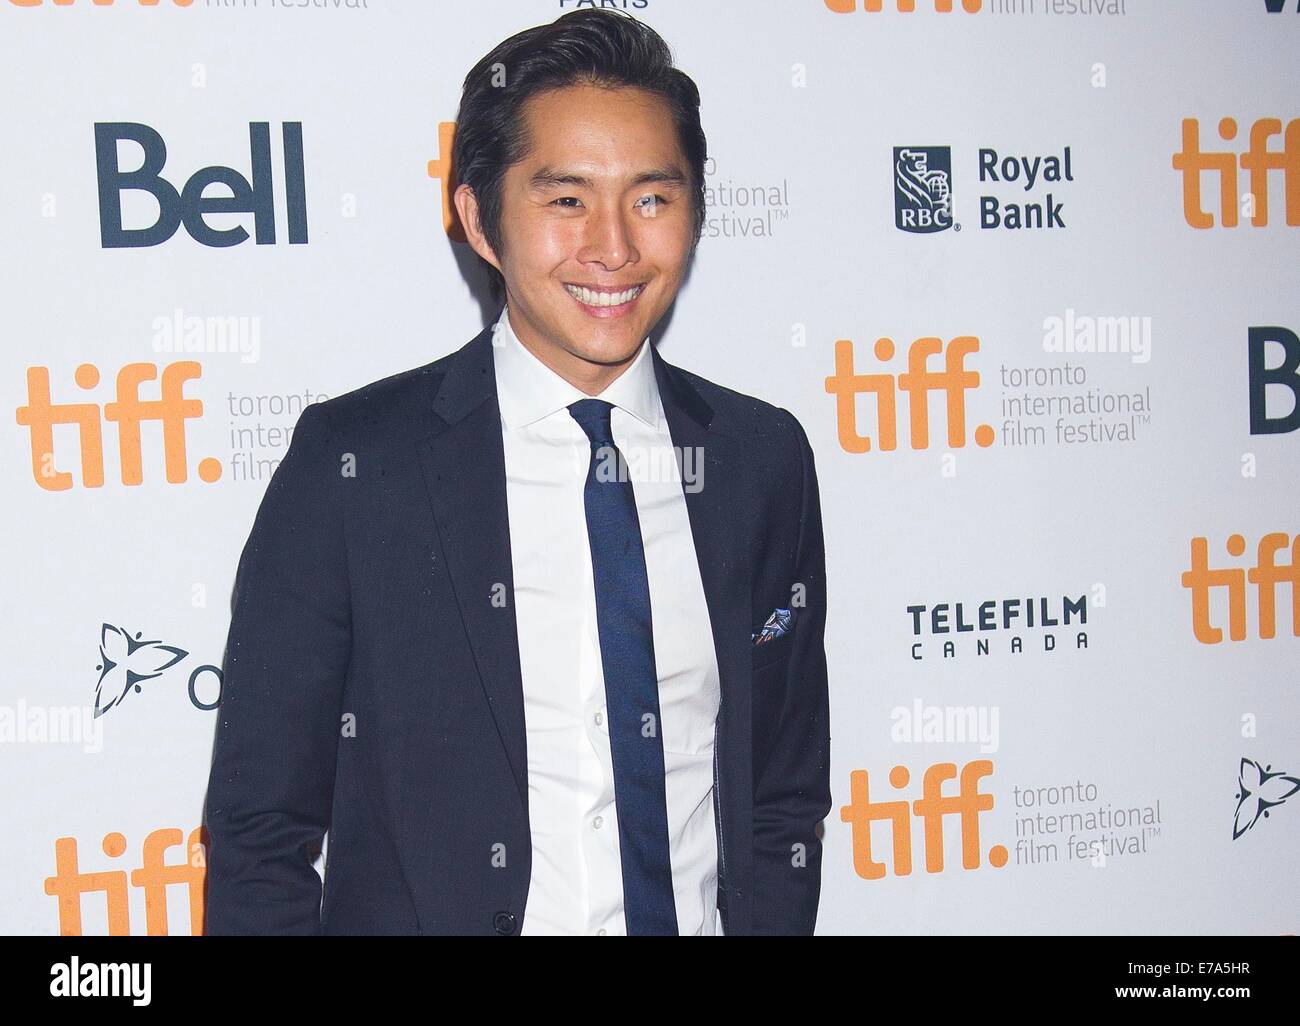 Toronto, Canada. 10th Sep, 2014. Actor Justin Chon poses for photos before the world premiere of the film 'Revenge of The Green Dragons' at Ryerson Theater during the 39th Toronto International Film Festival in Toronto, Canada, Sept. 10, 2014. Credit:  Zou Zheng/Xinhua/Alamy Live News Stock Photo